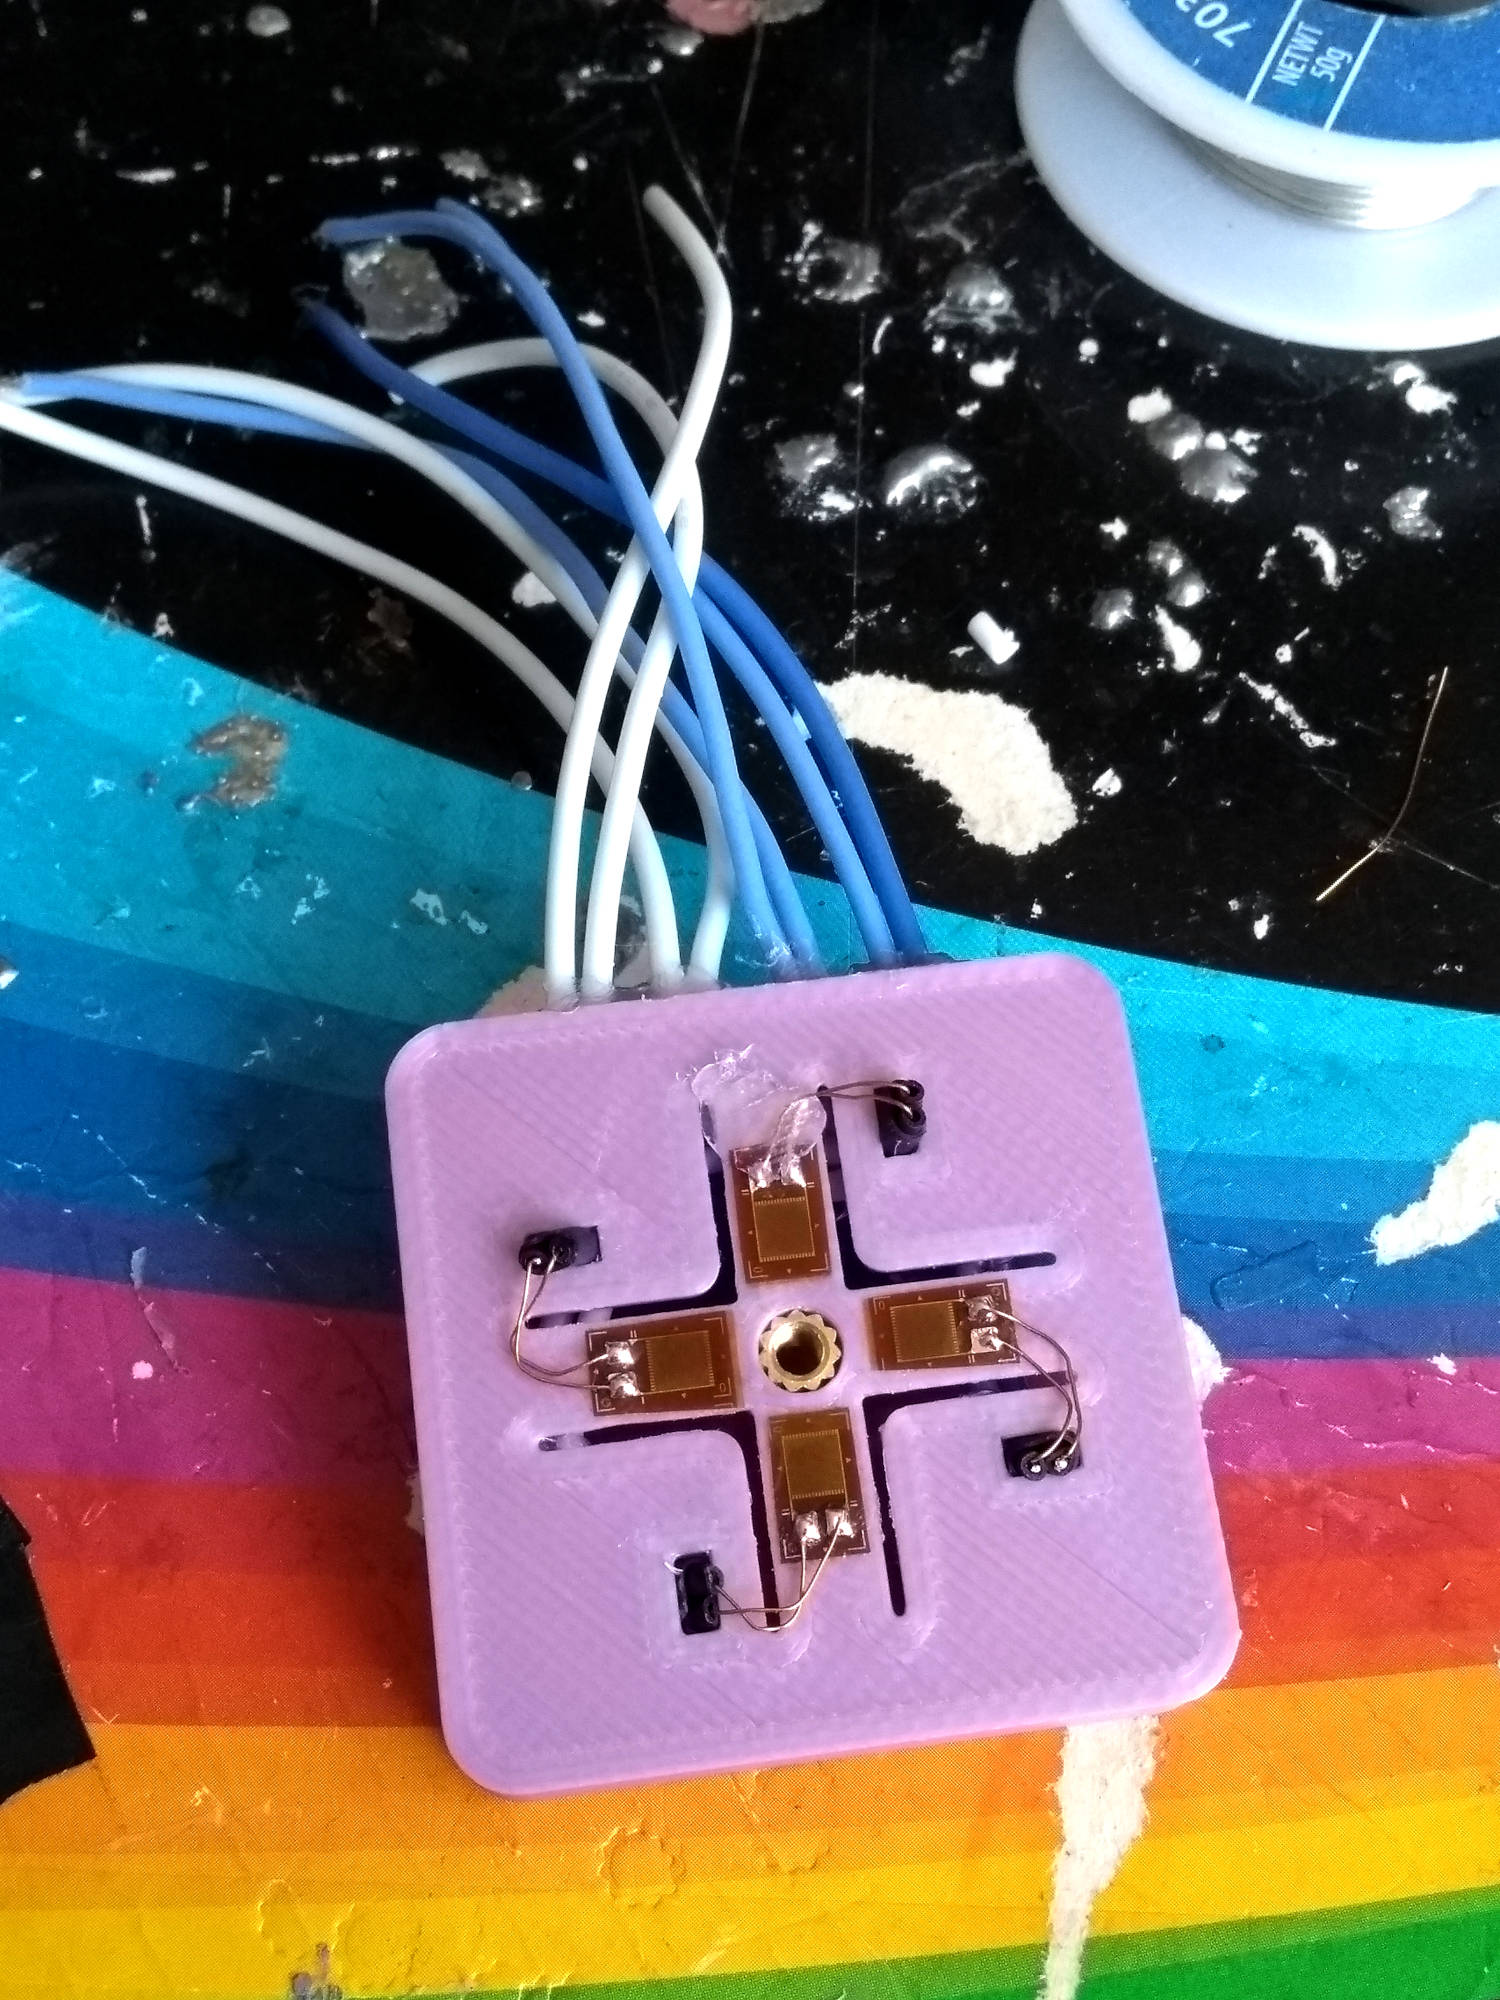 Strain gauges mounted to the 3D print and wired up, using tiny wires which connect to larger wires